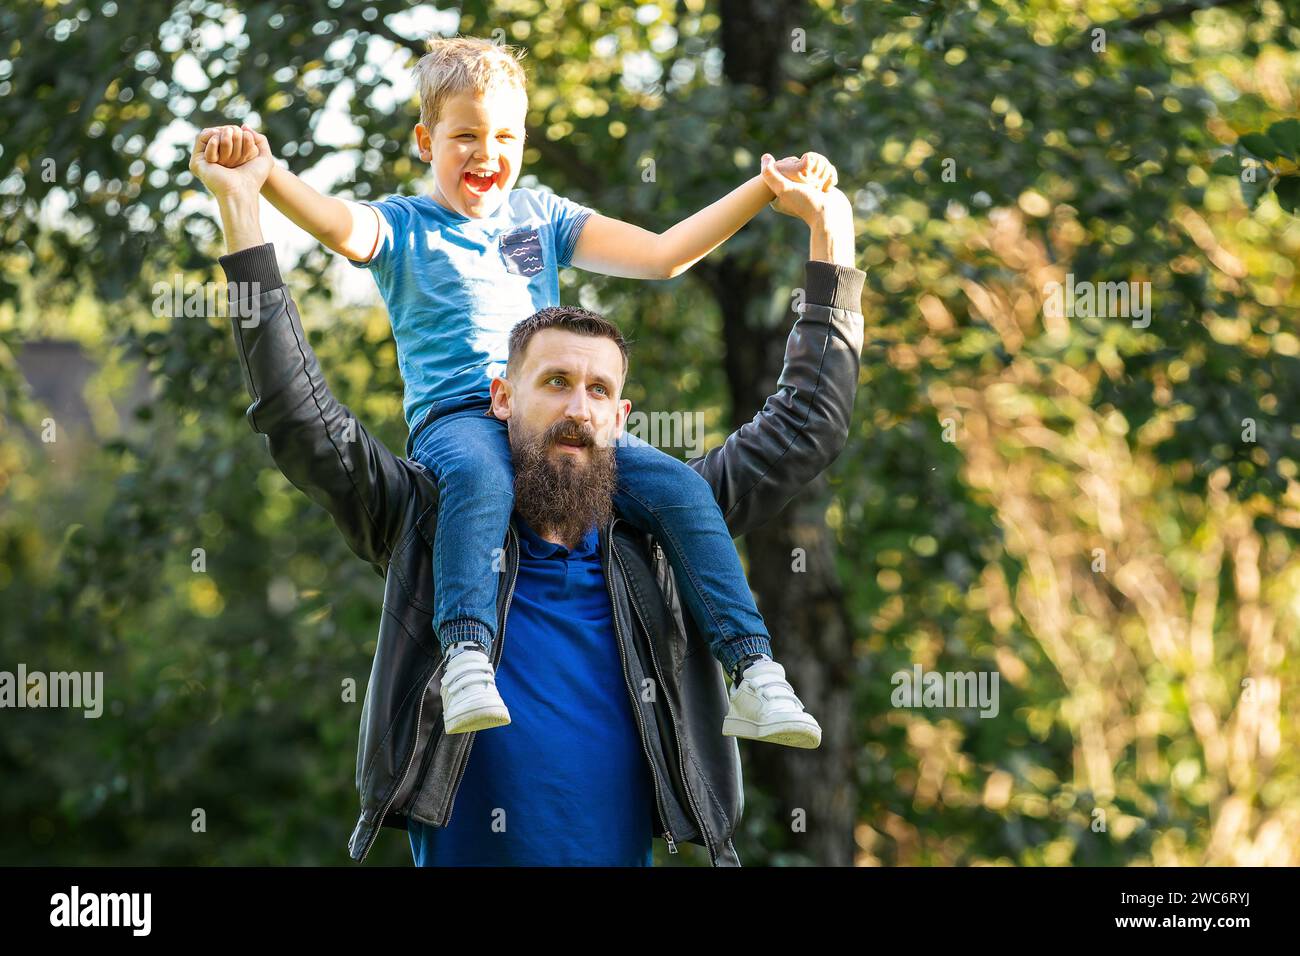 Portrait of a happy laughing sunlit child on the shoulders of his bearded father against a background of summer foliage. Stock Photo